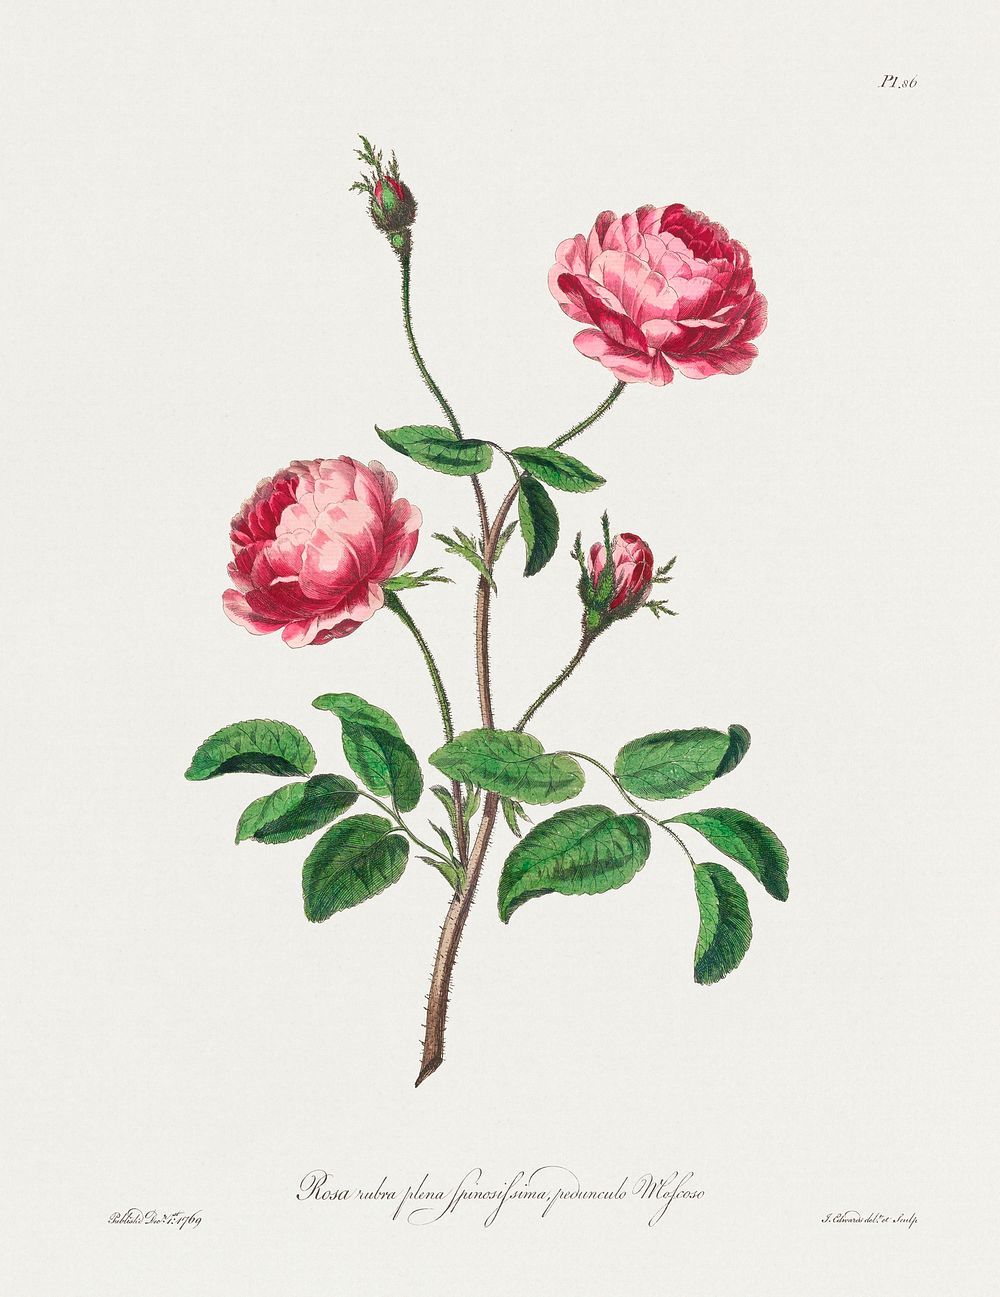 Rosa rubra plena Spinosissima, peounculo Moscoso (1769) in high resolution by John Edwards. Original from The Minneapolis…